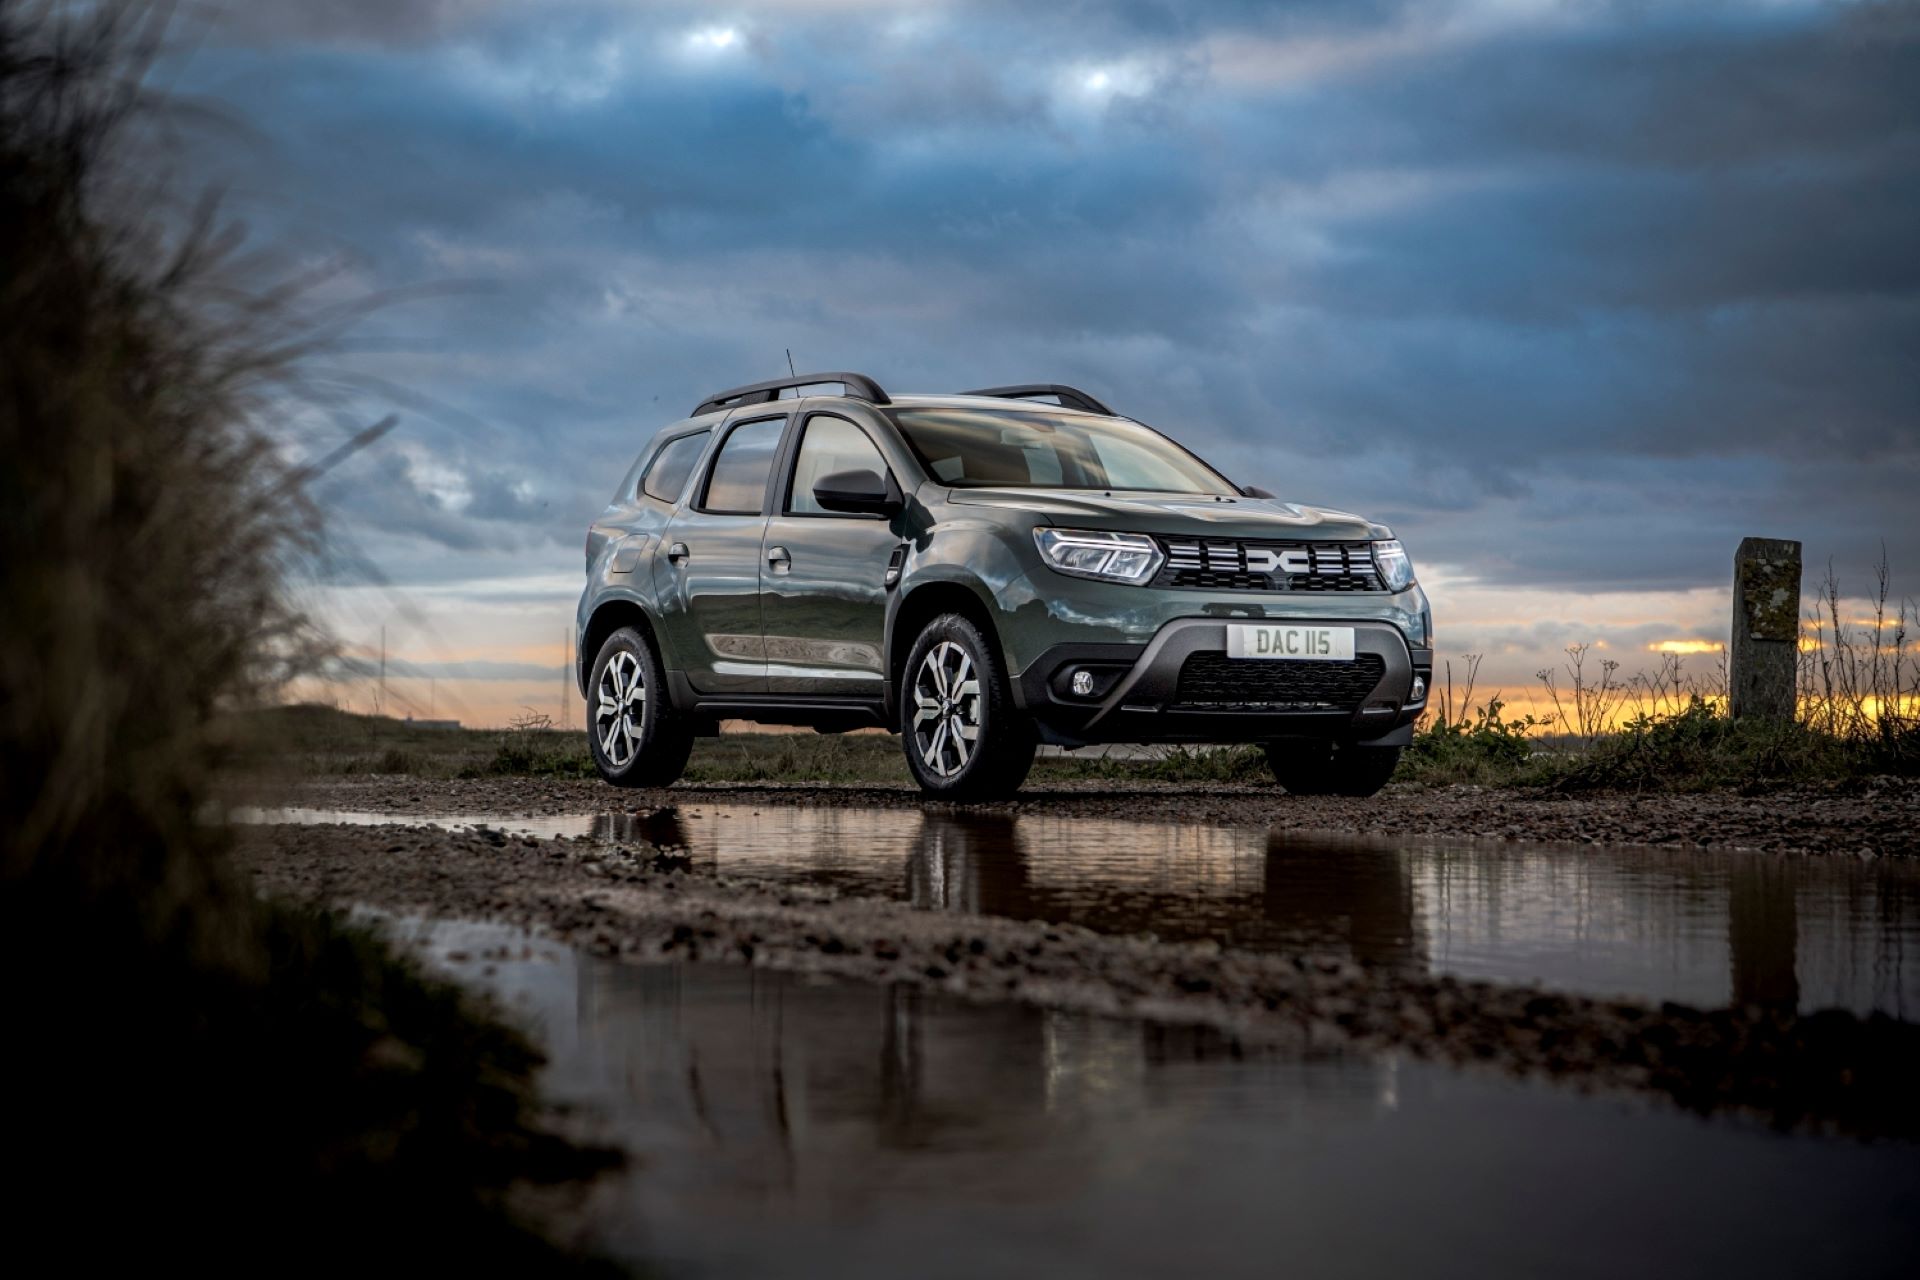 Dacia Duster named first-in-class second-hand buy for families